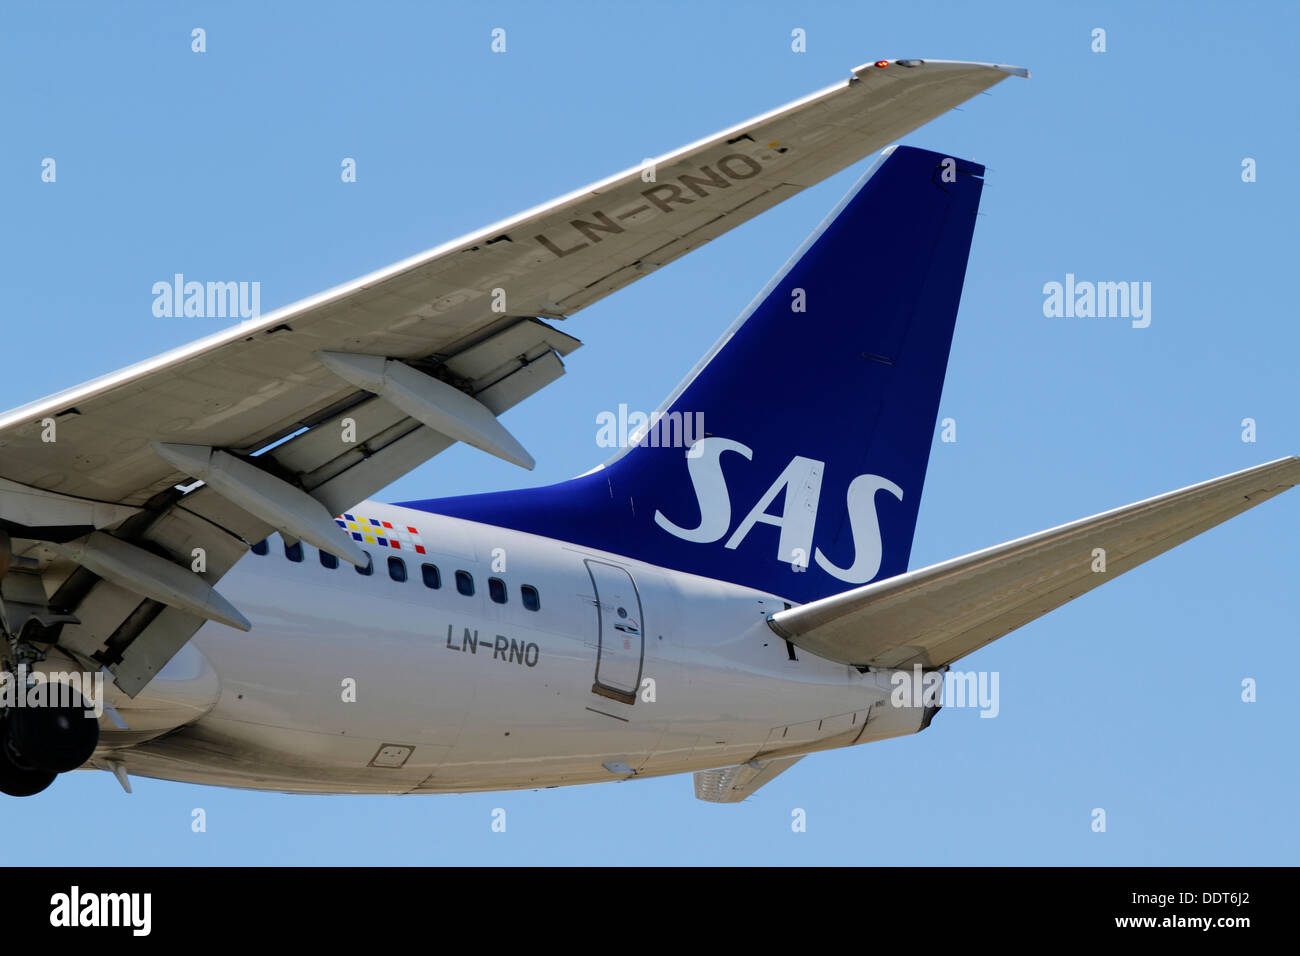 Rear part and SAS logo of Scandinavian Airlines Boeing 737-783, LN-RNO,  on final approach to Copenhagen Airport Stock Photo